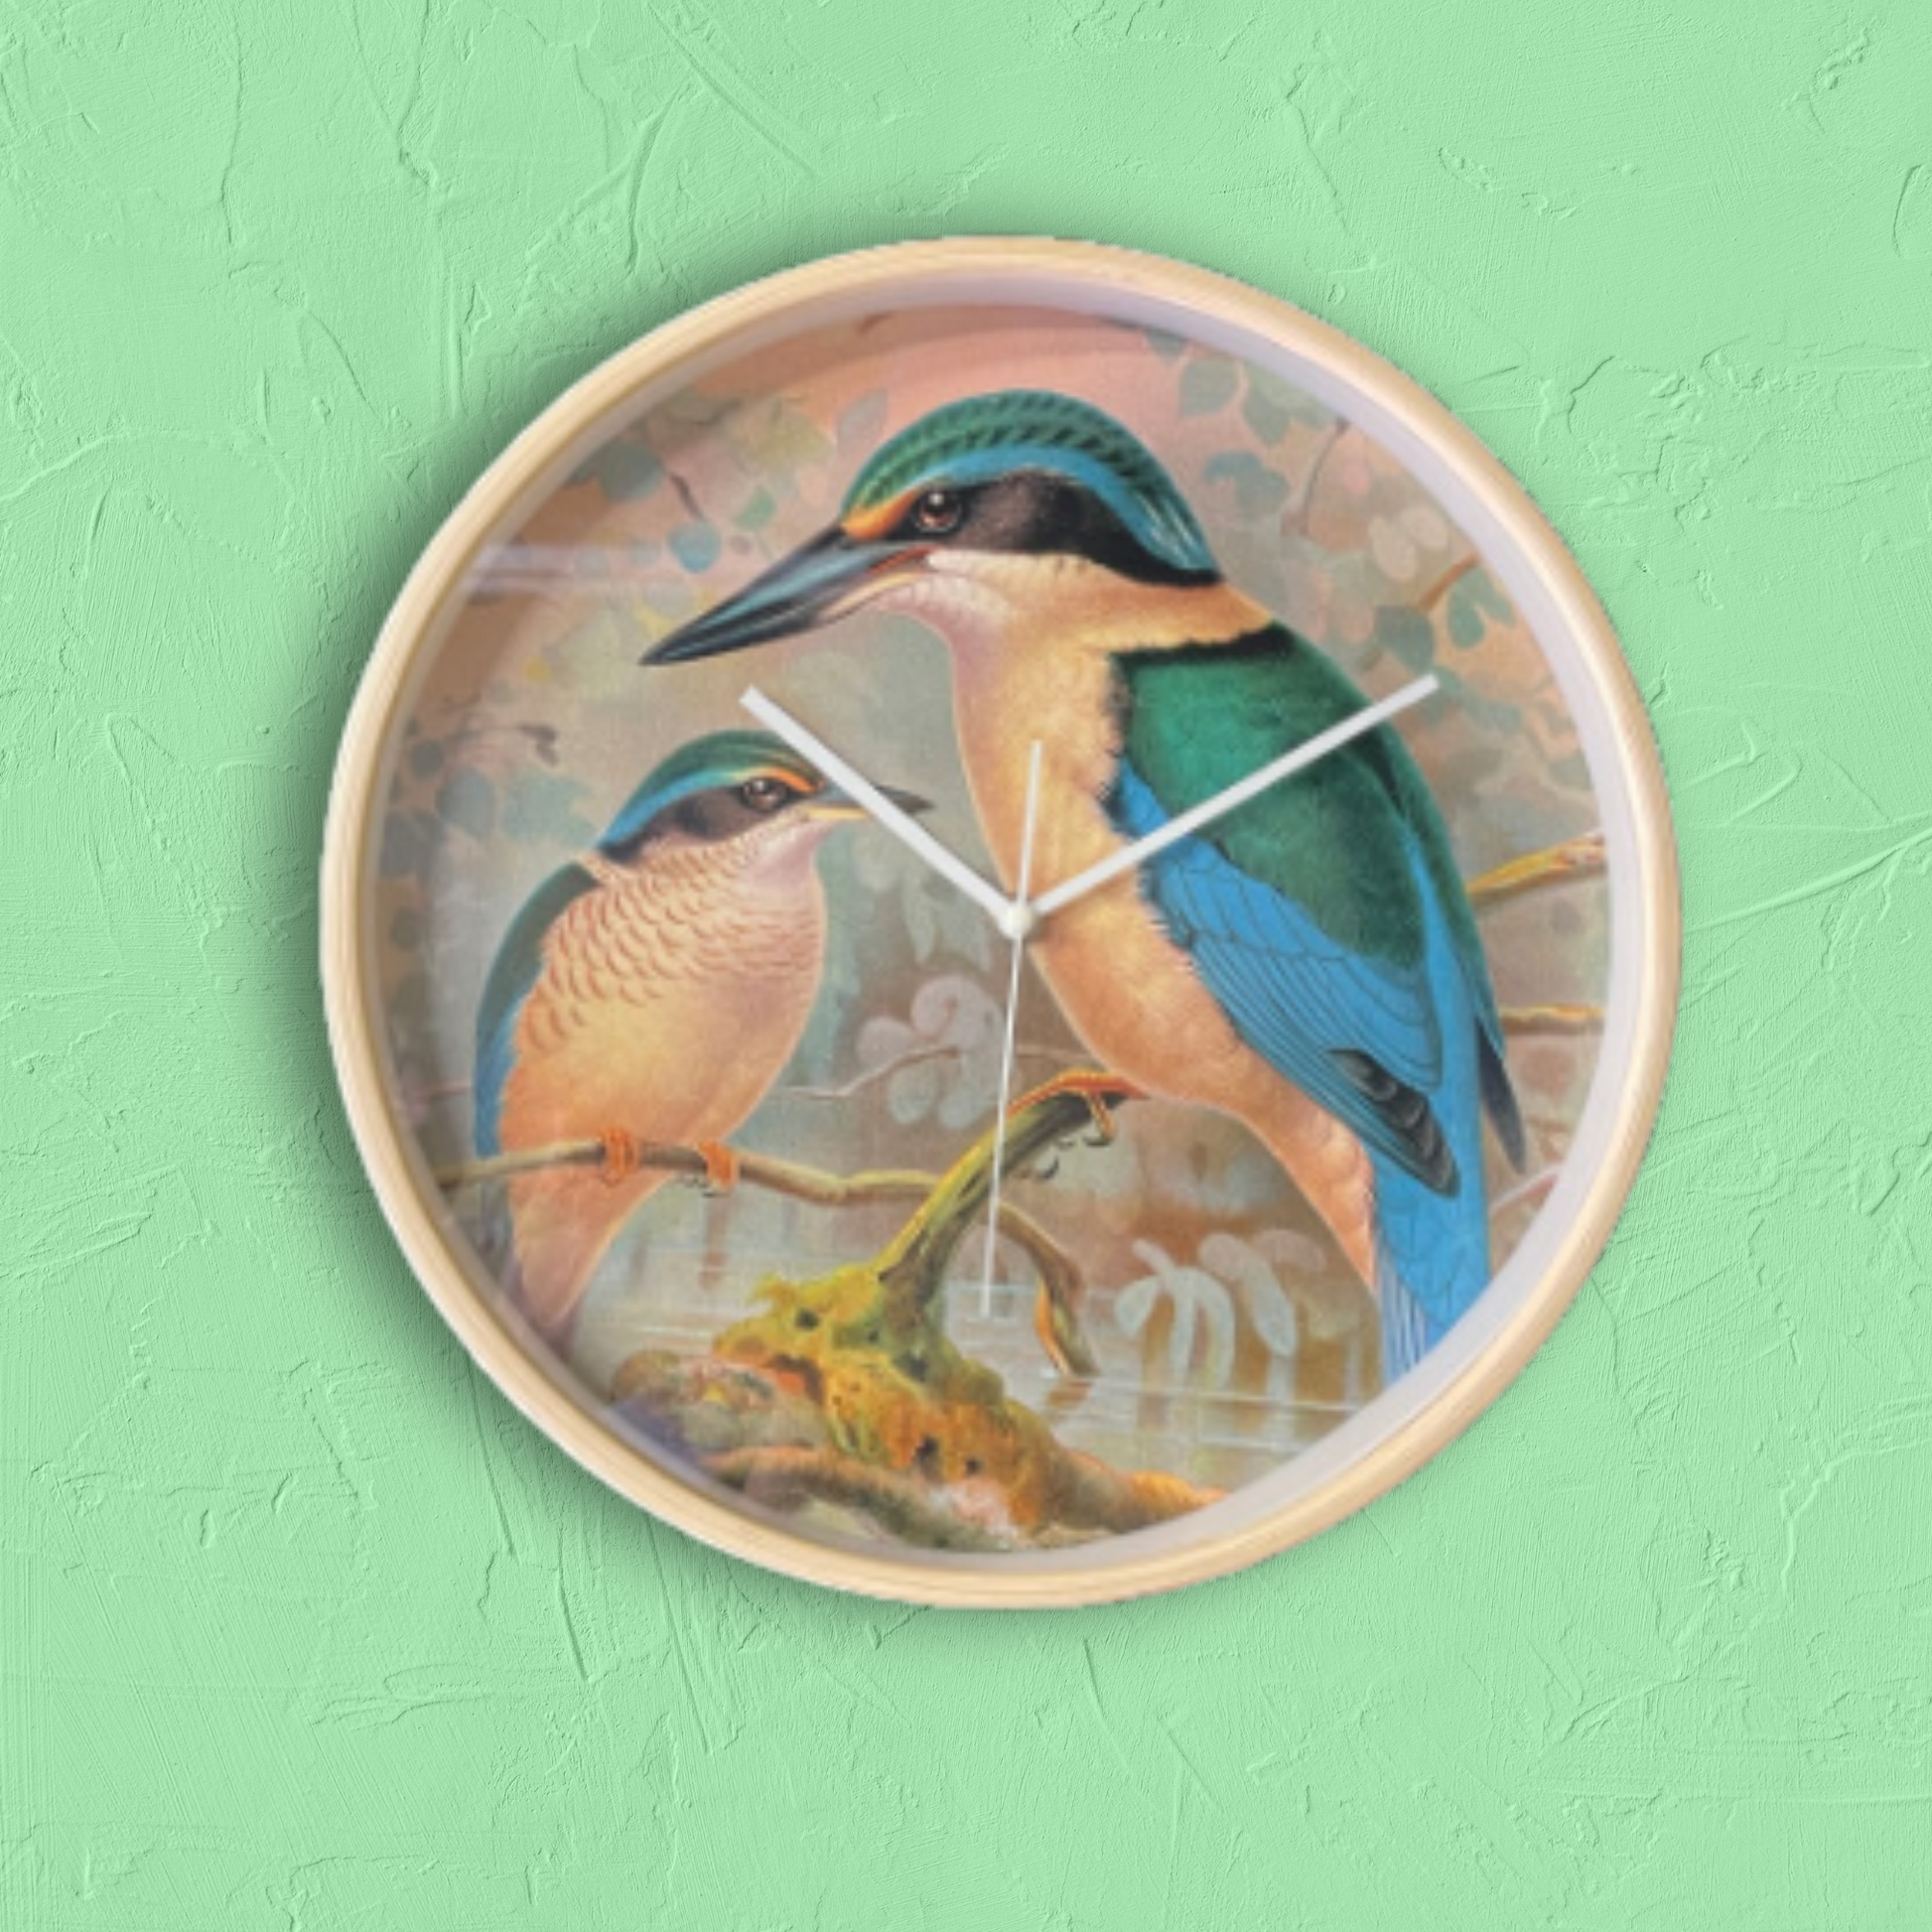 Wooden framed clock with pair of Kingfisher birds pictured on the face.